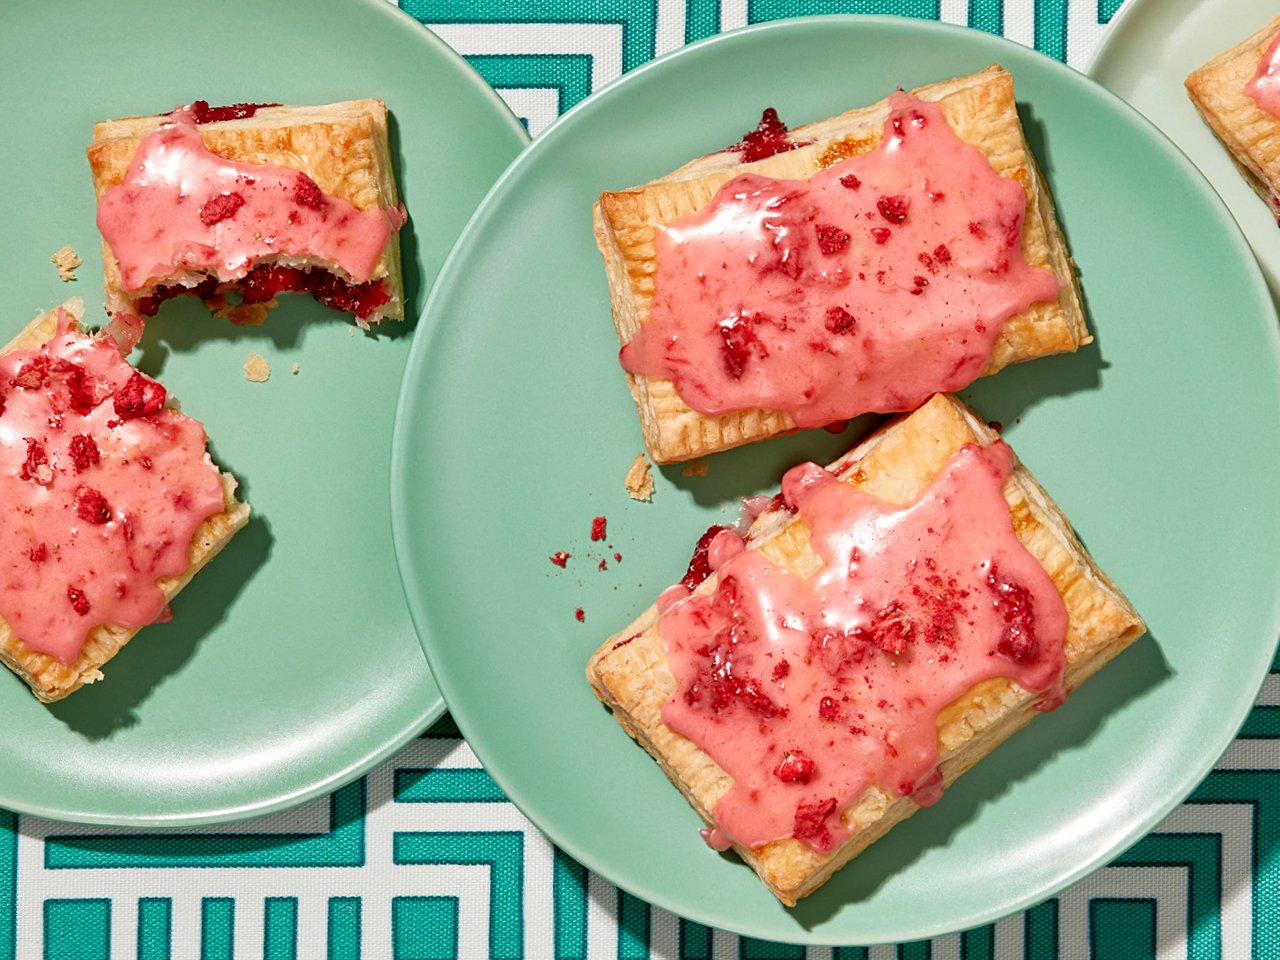 Two pink glazed strawberry handpies on two turquoise plates on a trellis-patterned tablecloth